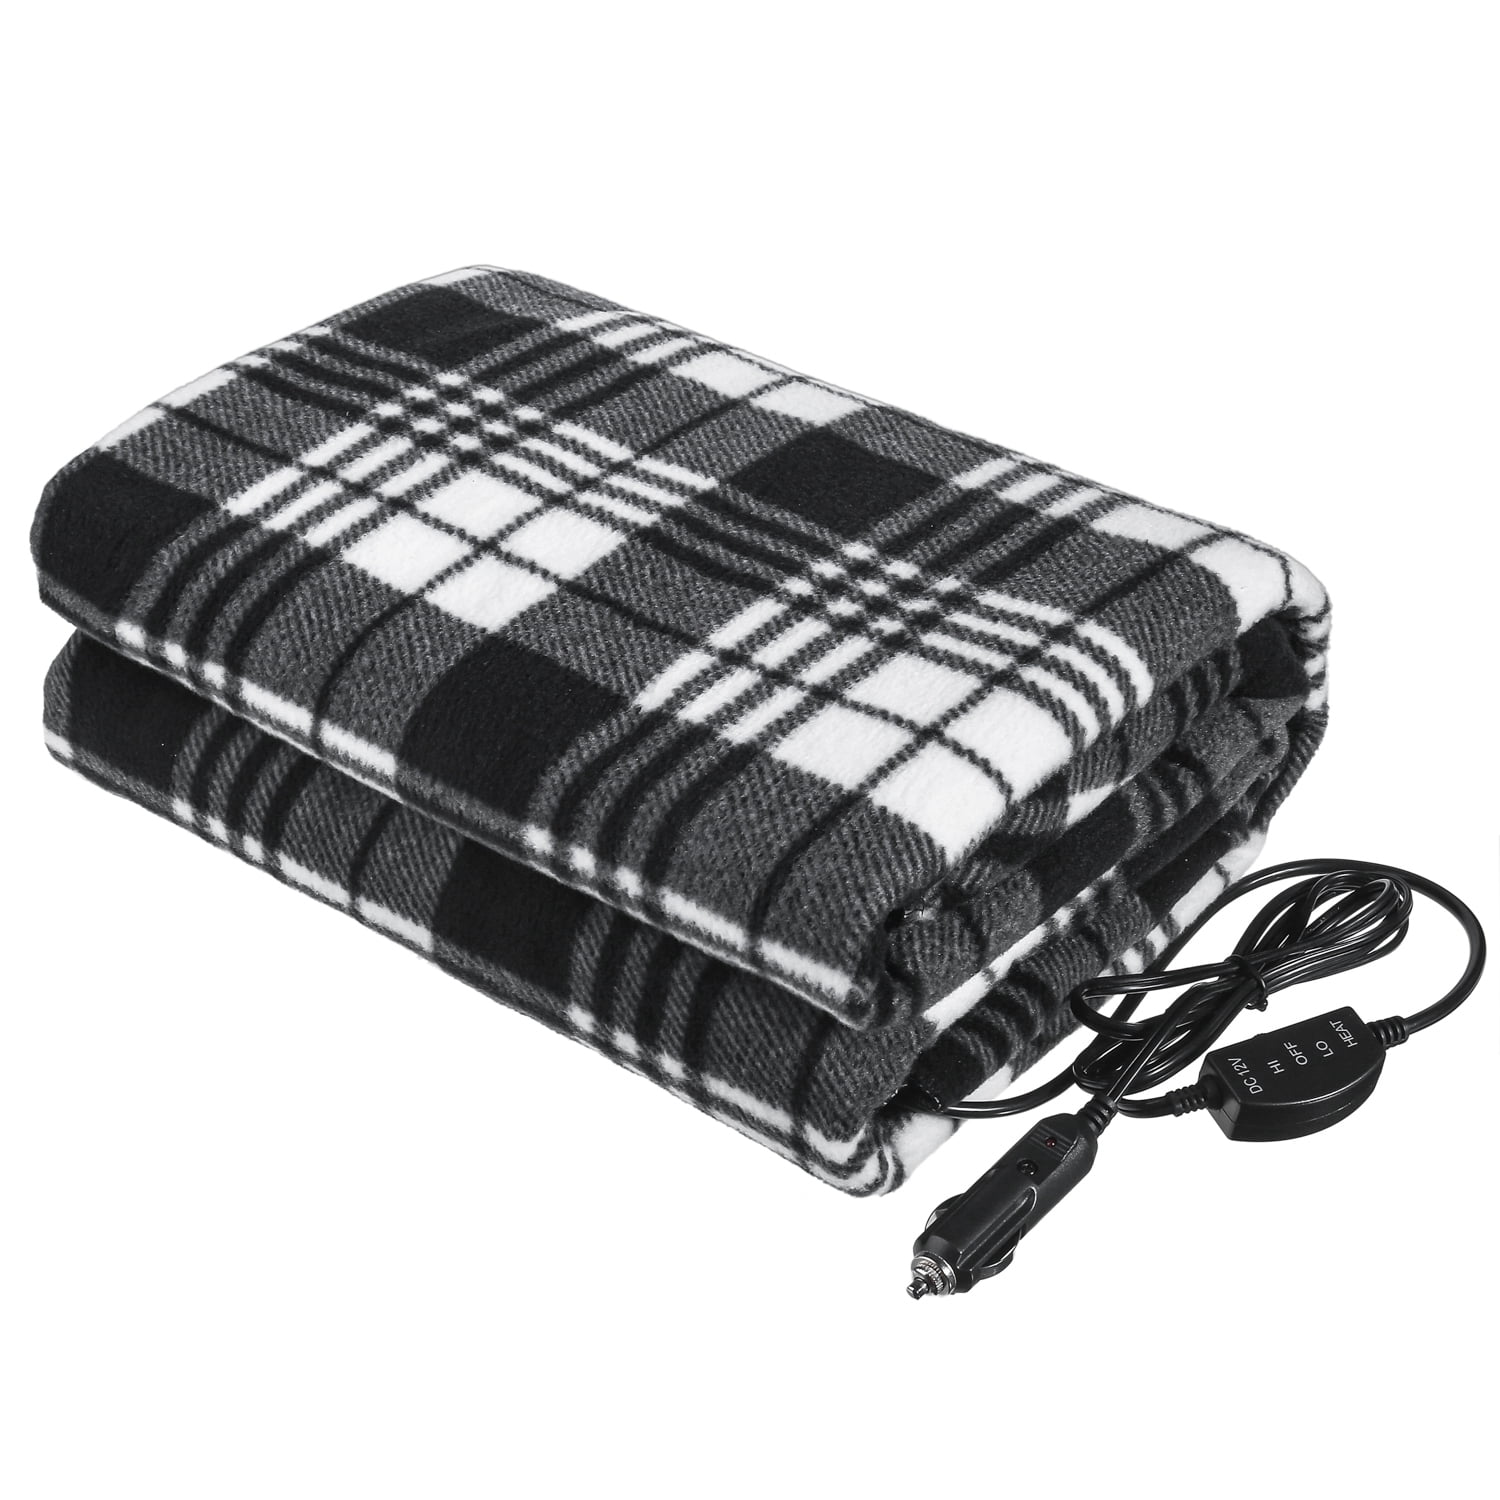 kati-way Car Electric Blanket Winter Hot Navy Blue Fleece Luxurious Comfy Polar Fleece Heated Travel Car Blanket 12v Car Constant Temperature Heating Blanket for Cold Weather 